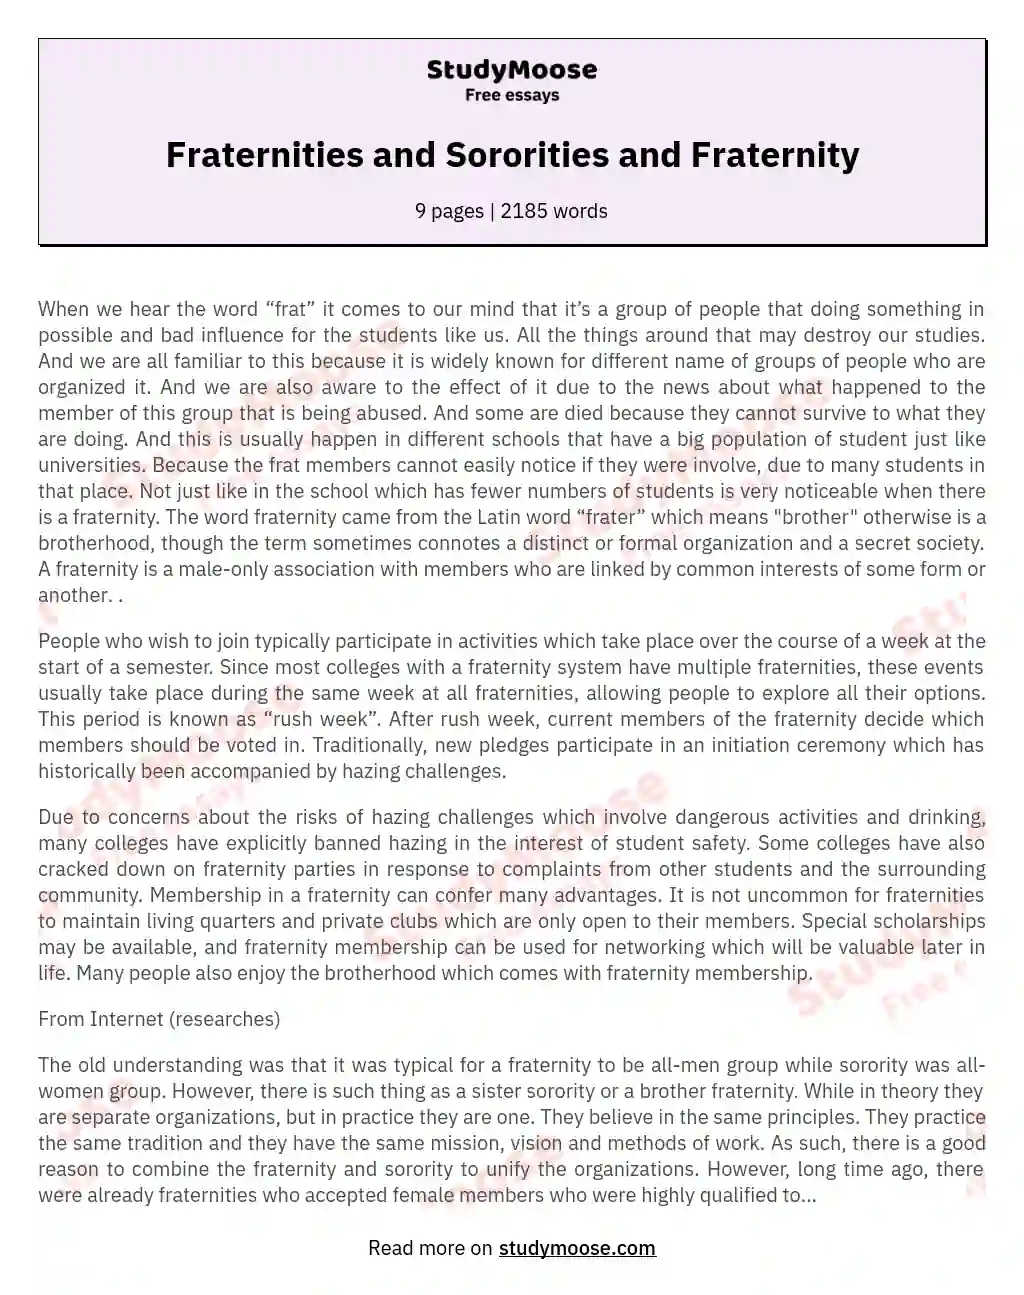 Fraternities and Sororities and Fraternity essay